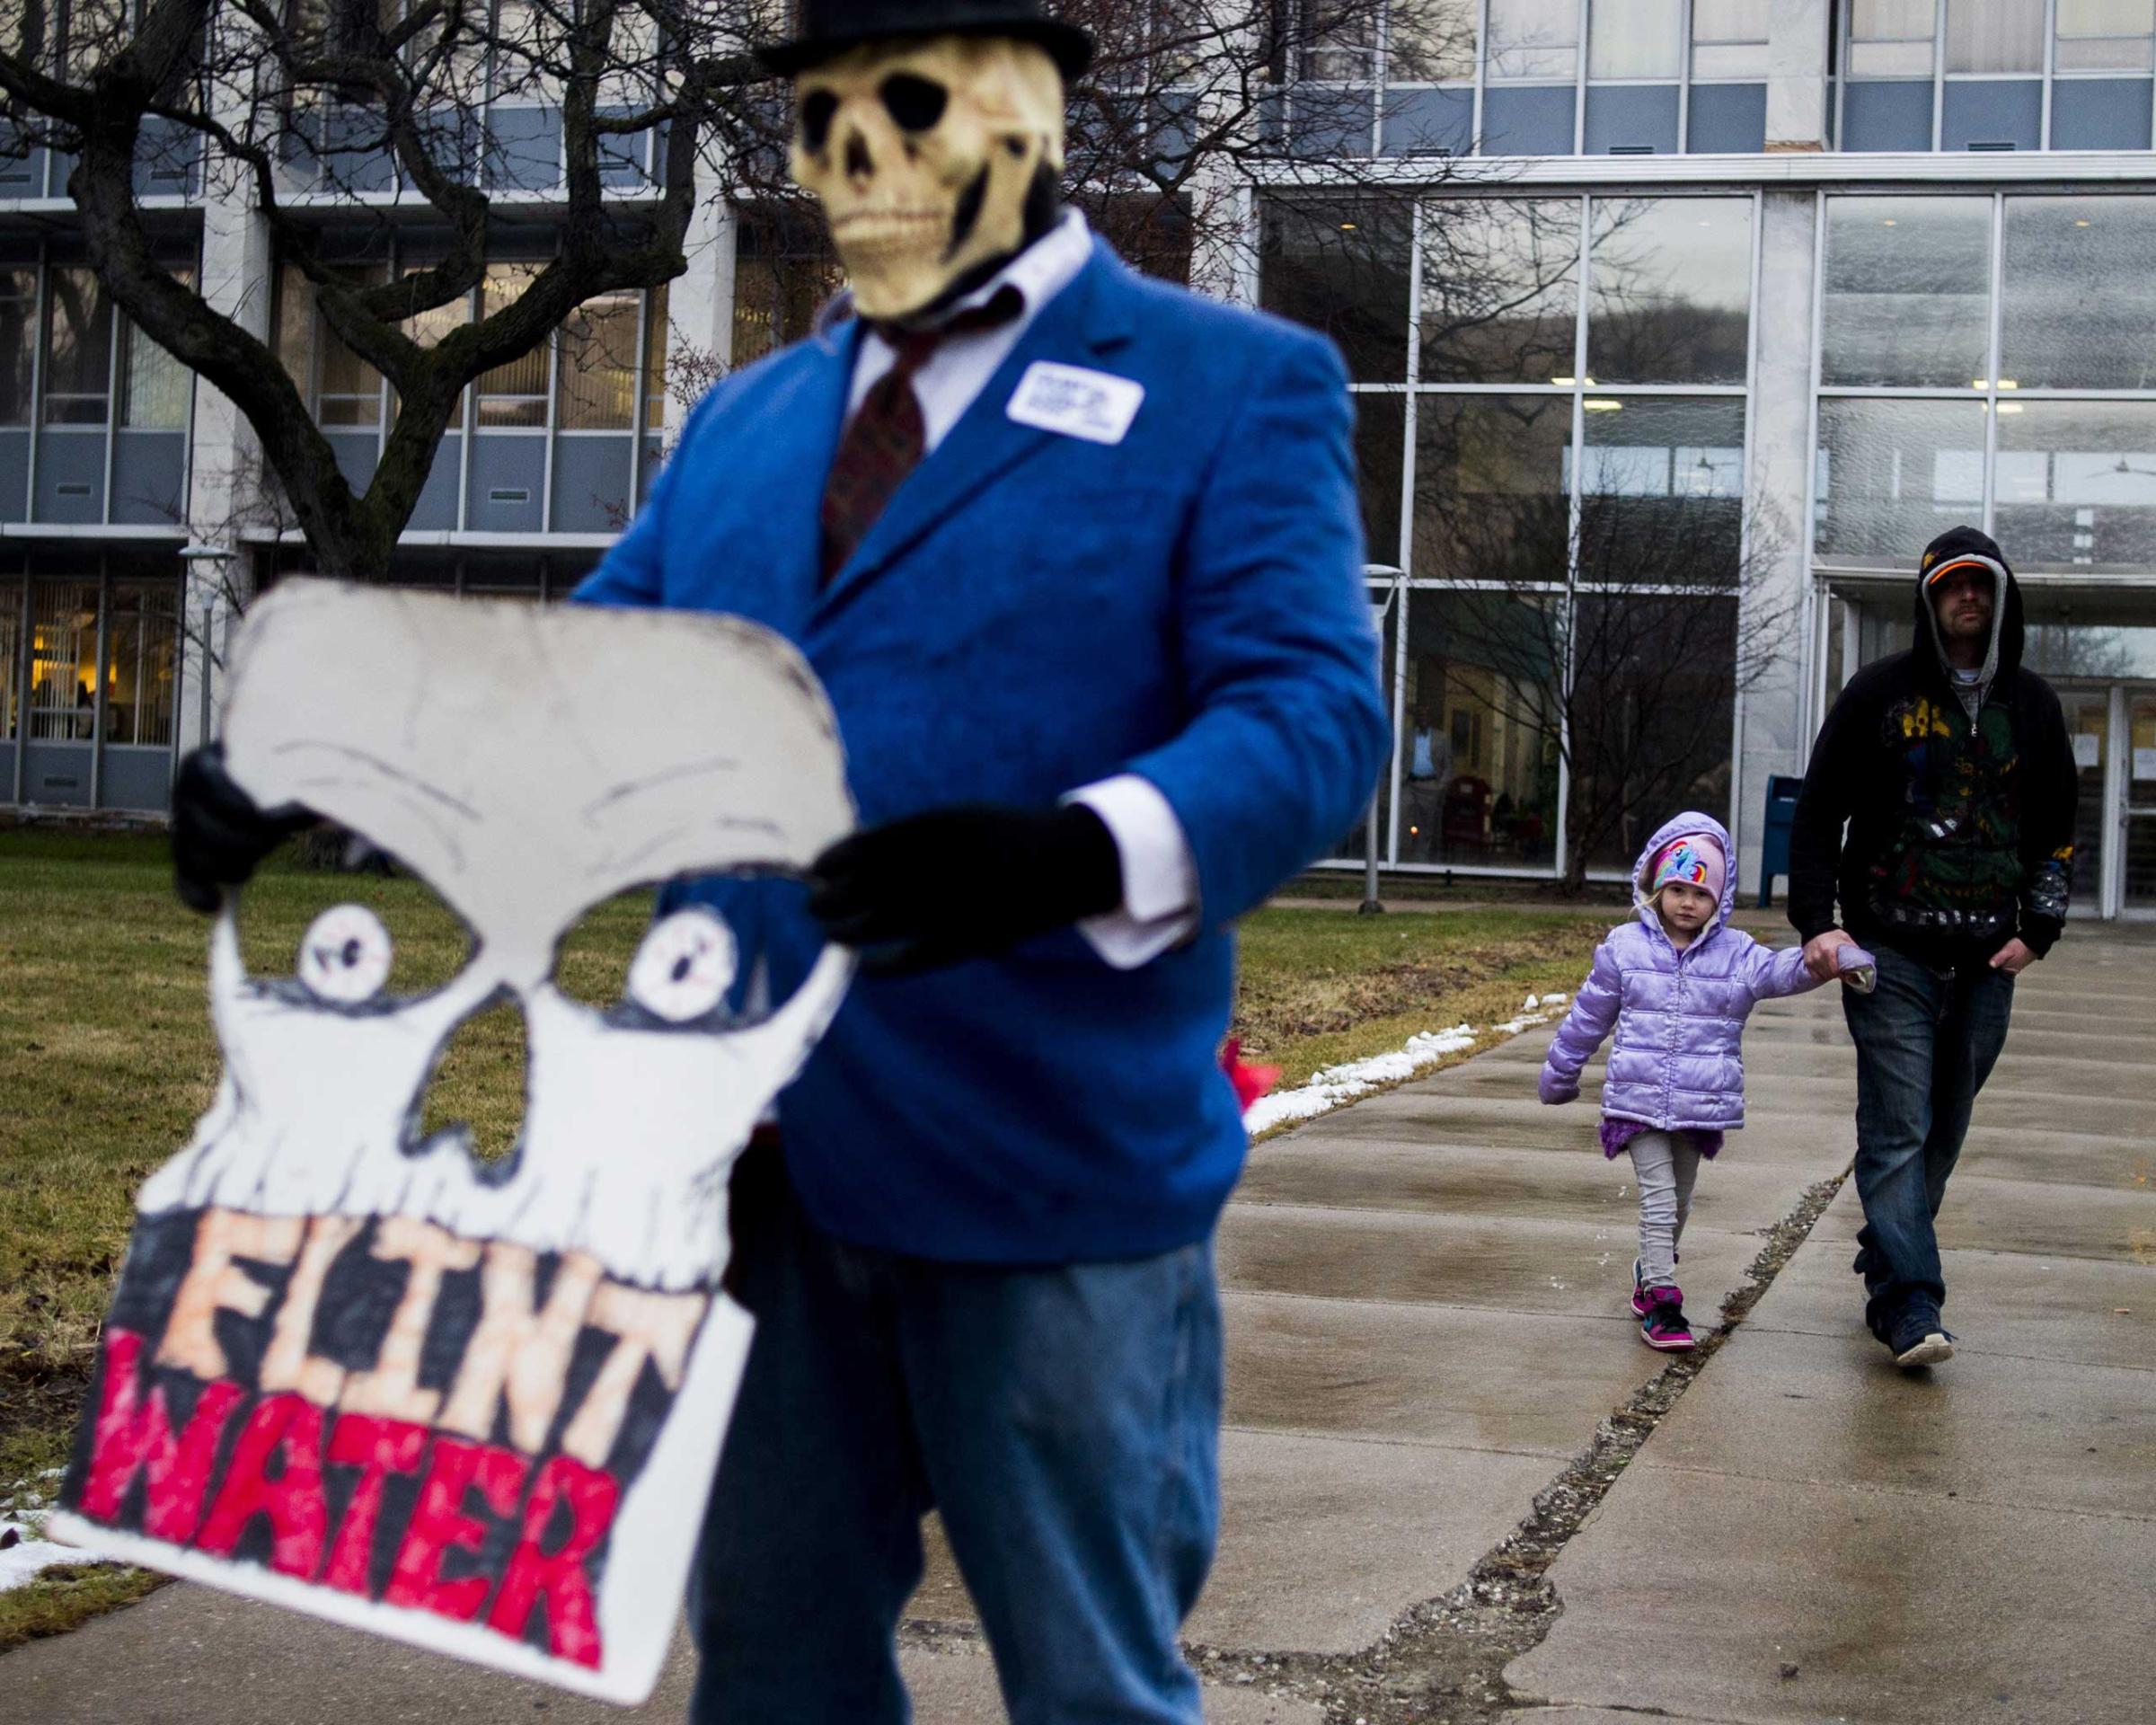 Flint resident Mike Hickey holds the hand of his daughter Natielee, 4, as they walk past activists outside of City Hall to protest Michigan Gov. Rick Snyder's handling of the water crisis Jan. 8, 2016 in Flint. Mich.